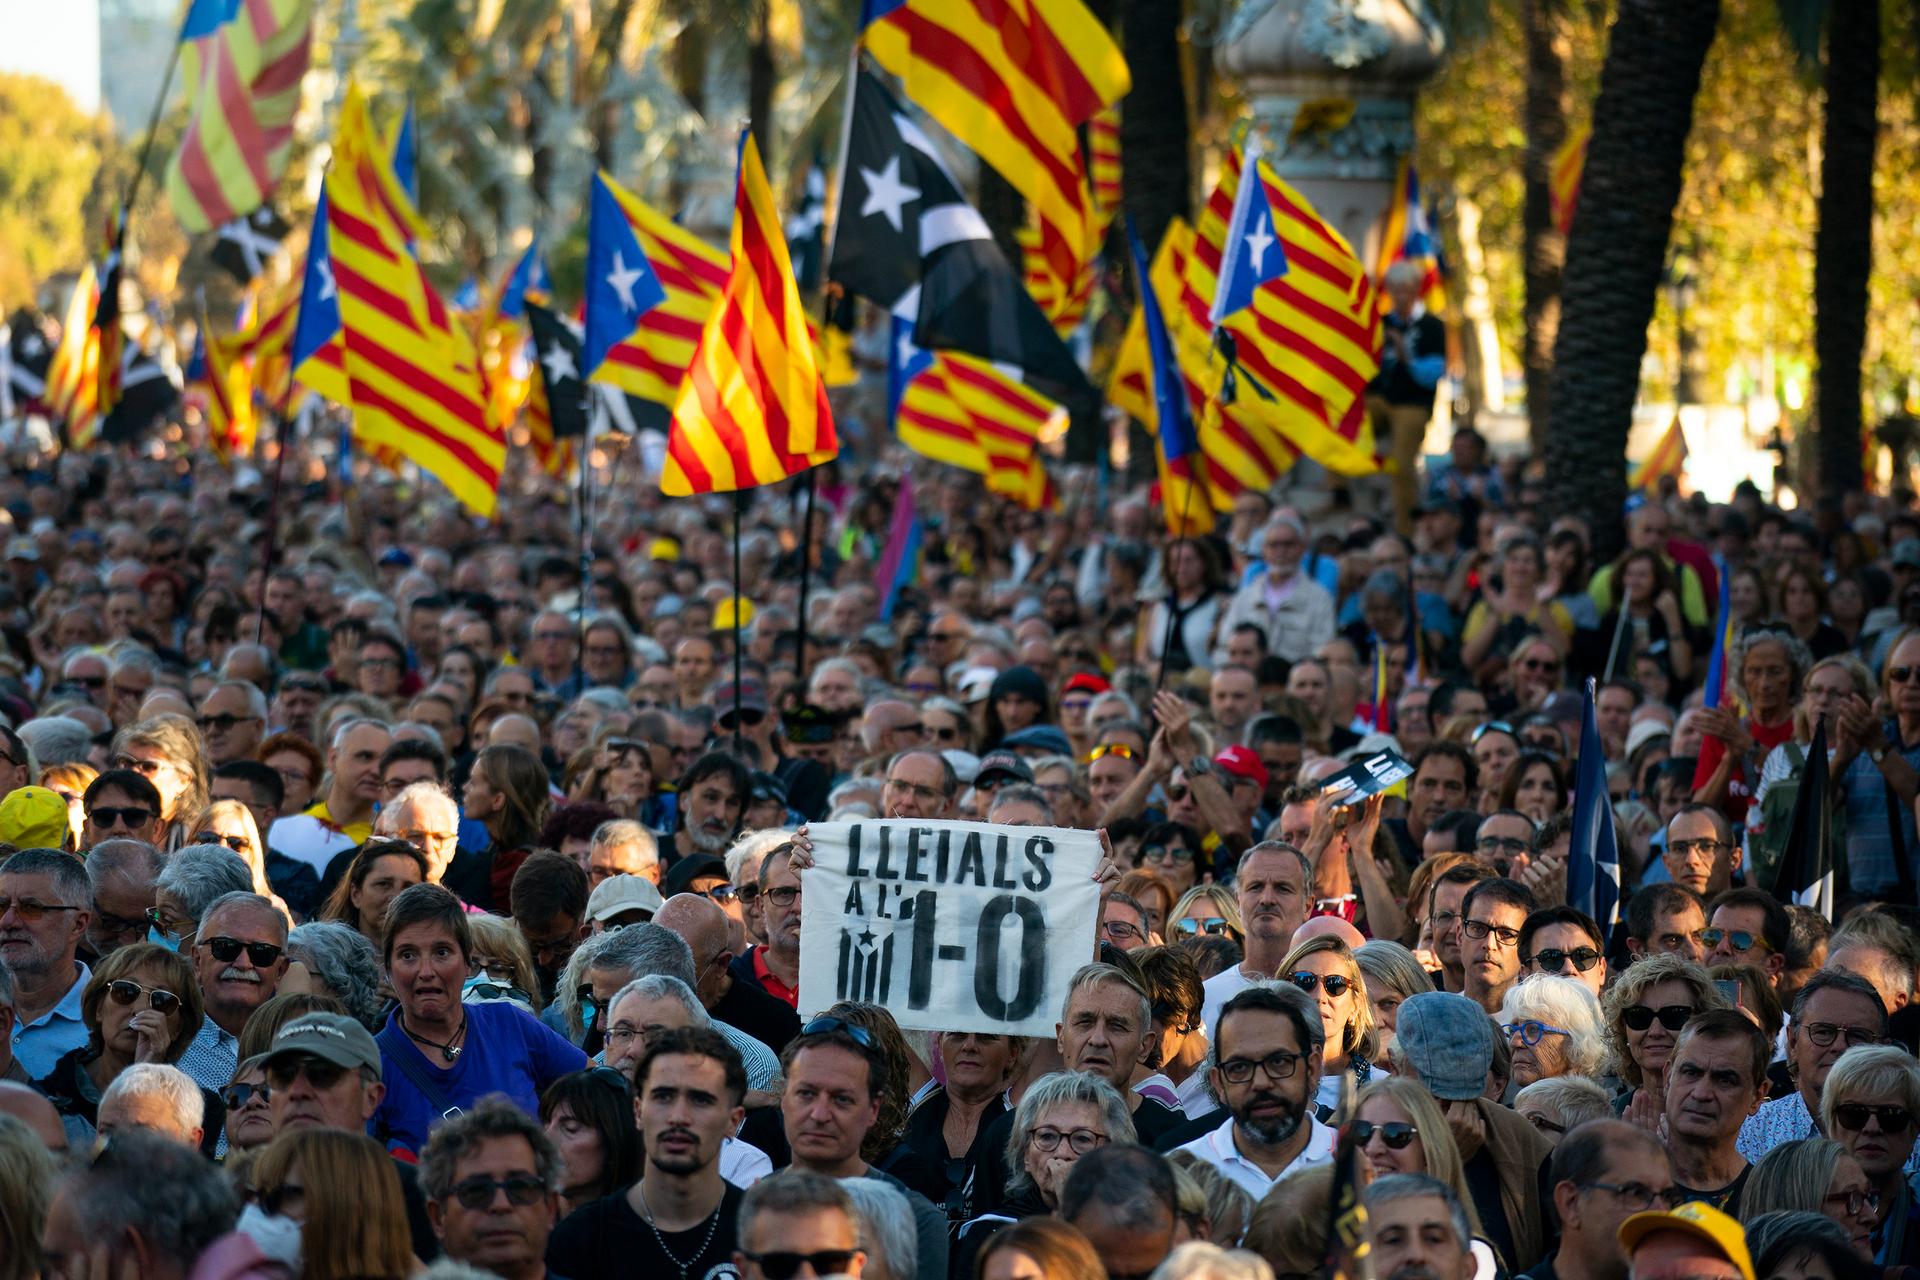 Protesters hold ''esteladas'' or Catalonia independence flag as they take part in a demonstration to commemorate the fifth anniversary of an independence referendum that marked the high point of their movement to break away from the rest of Spain, in Barc